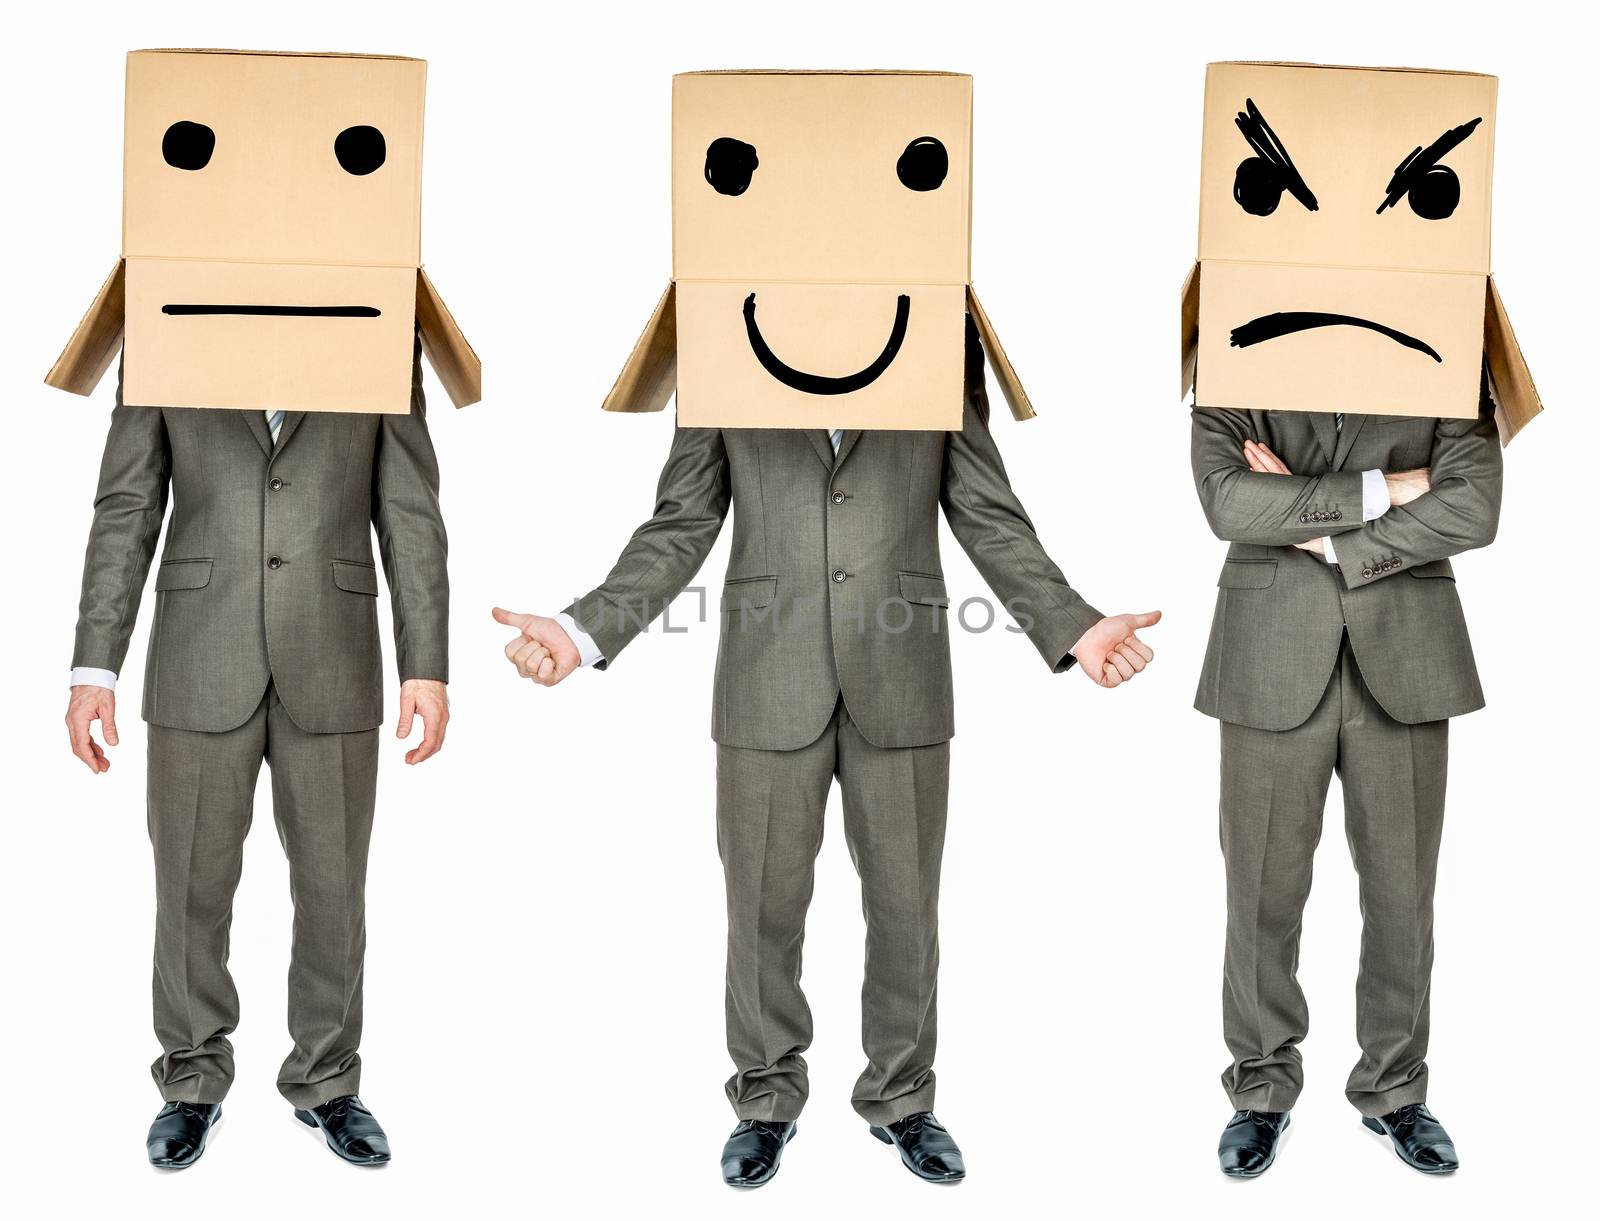 Set of business man with cardboard box on his head. Isolated on white